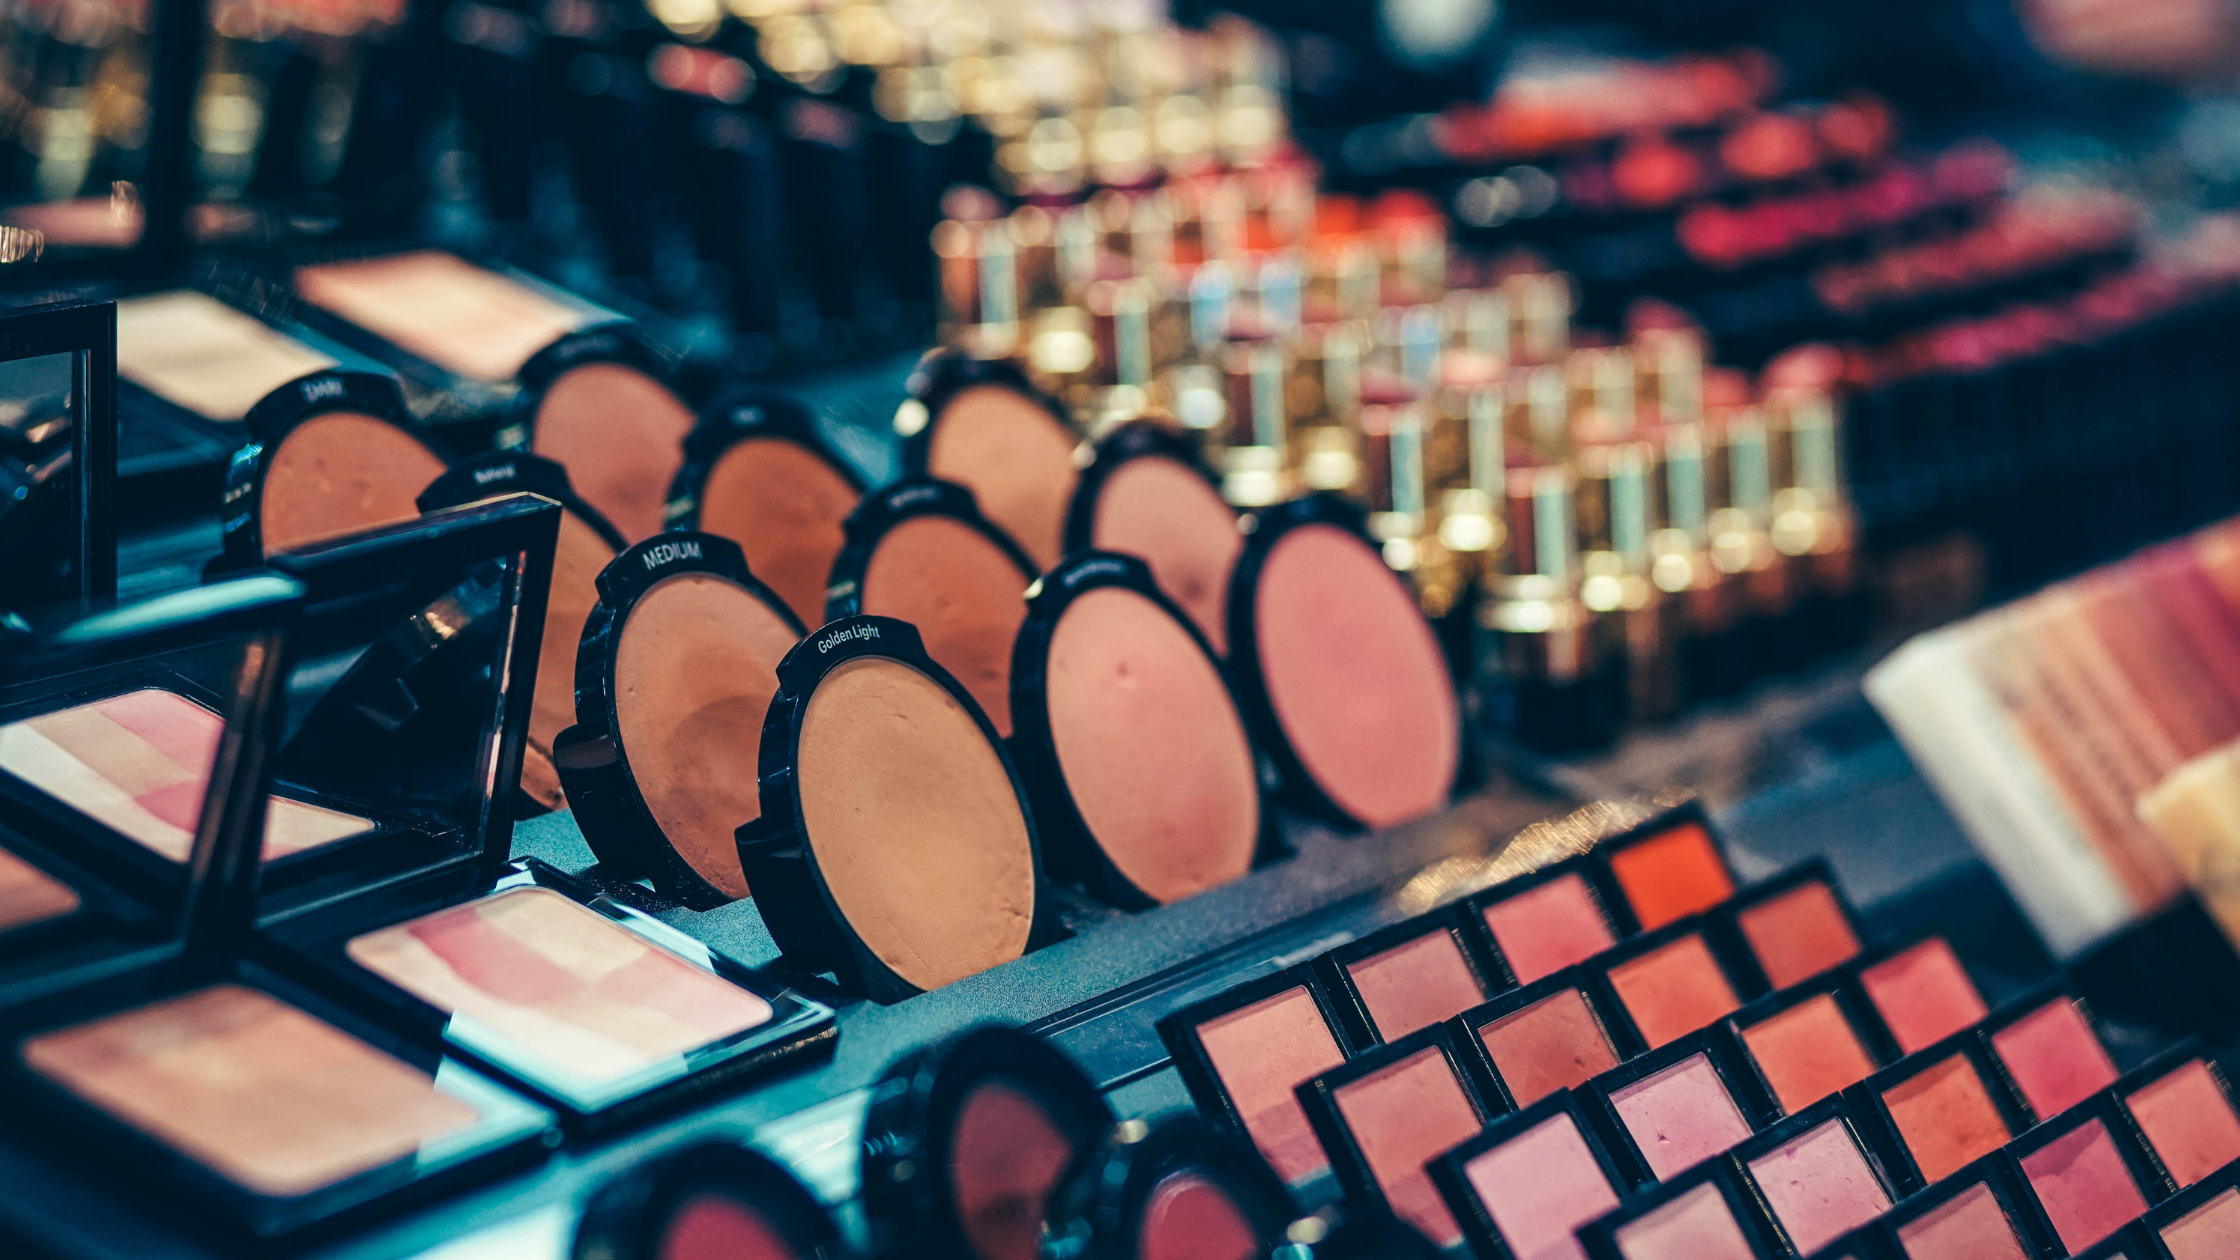 Protect Yourself: Avoiding Asbestos in Makeup Products